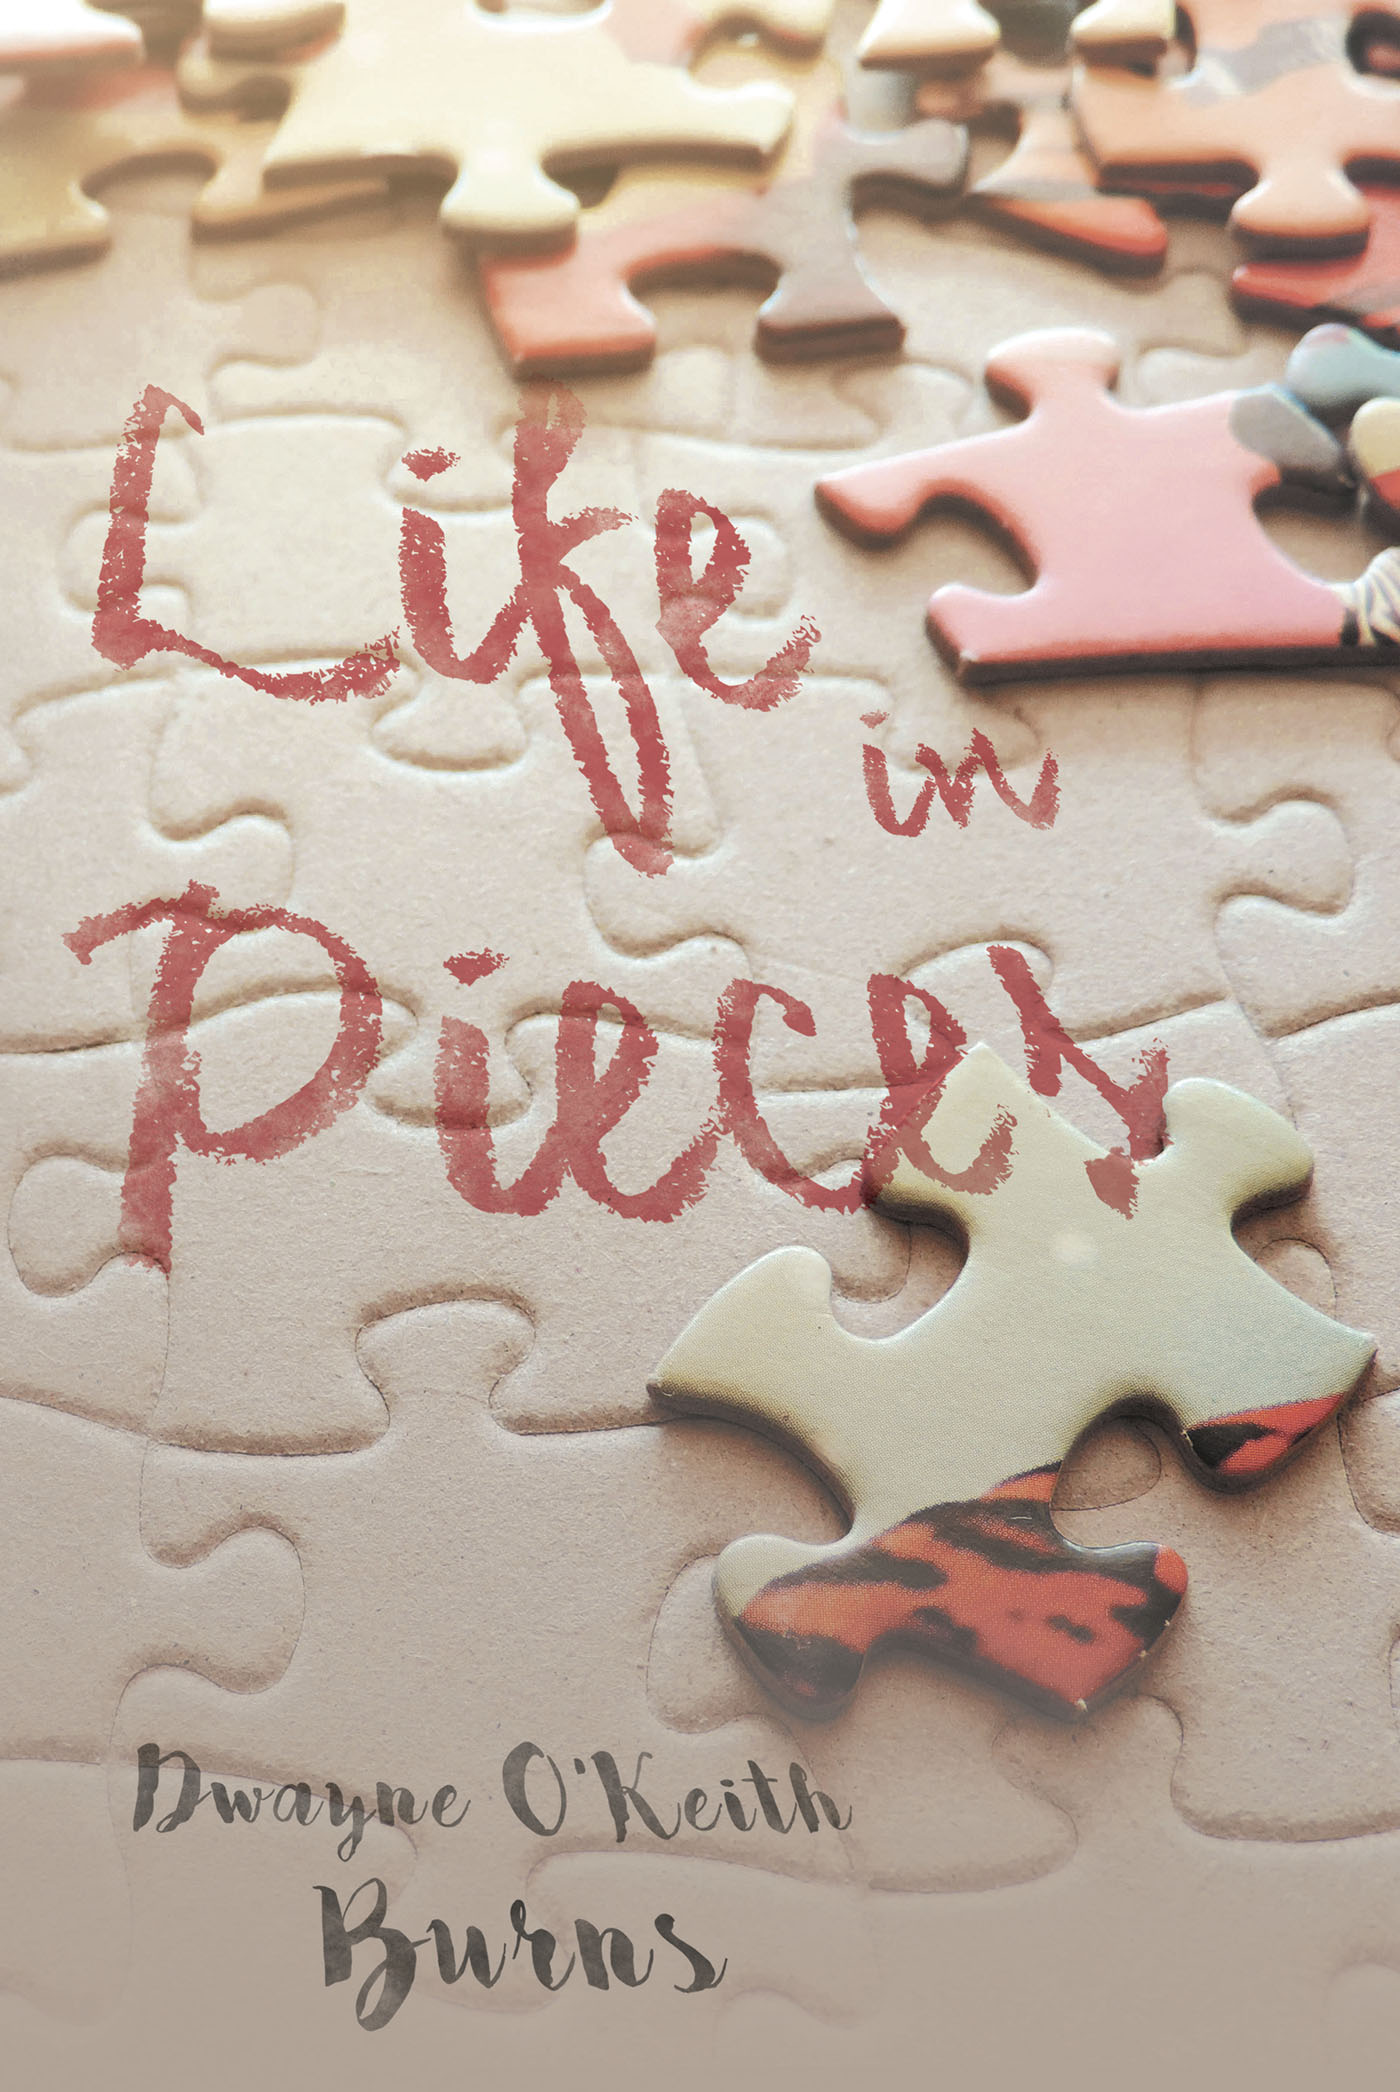  Life in Pieces Cover Image